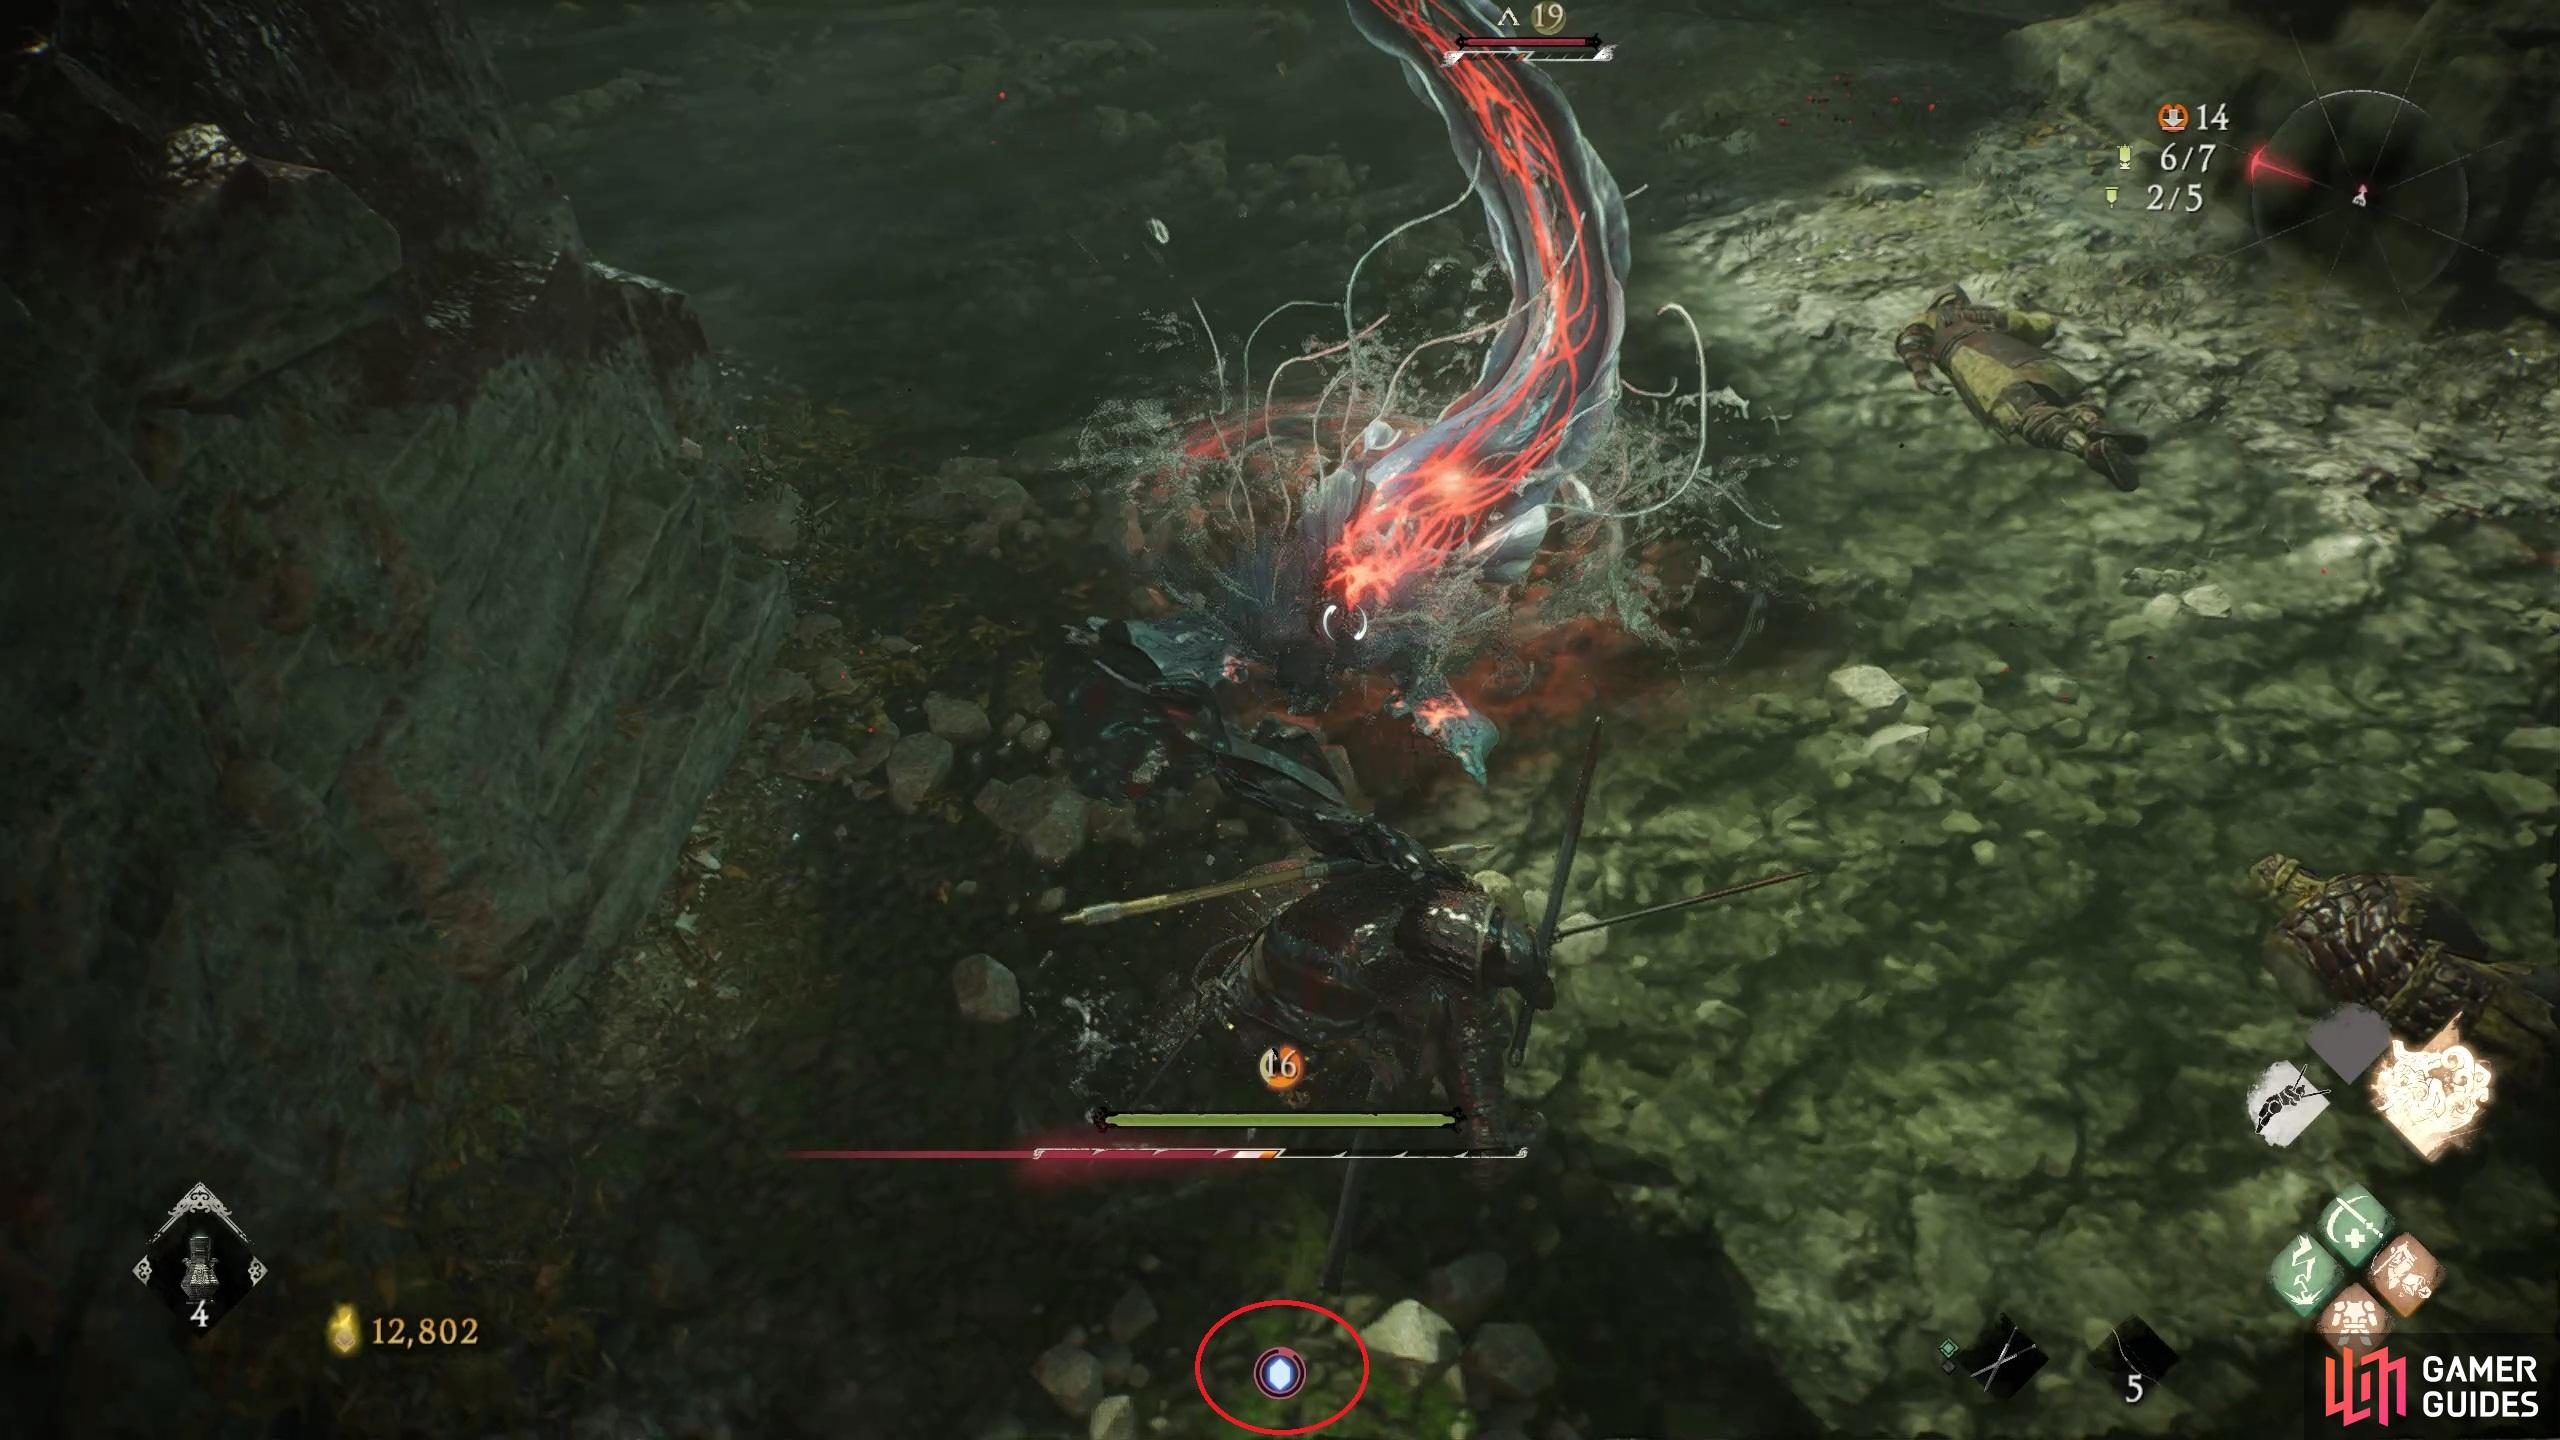 You can see a status effect shown for the player at the bottom of the screen, circled in red.